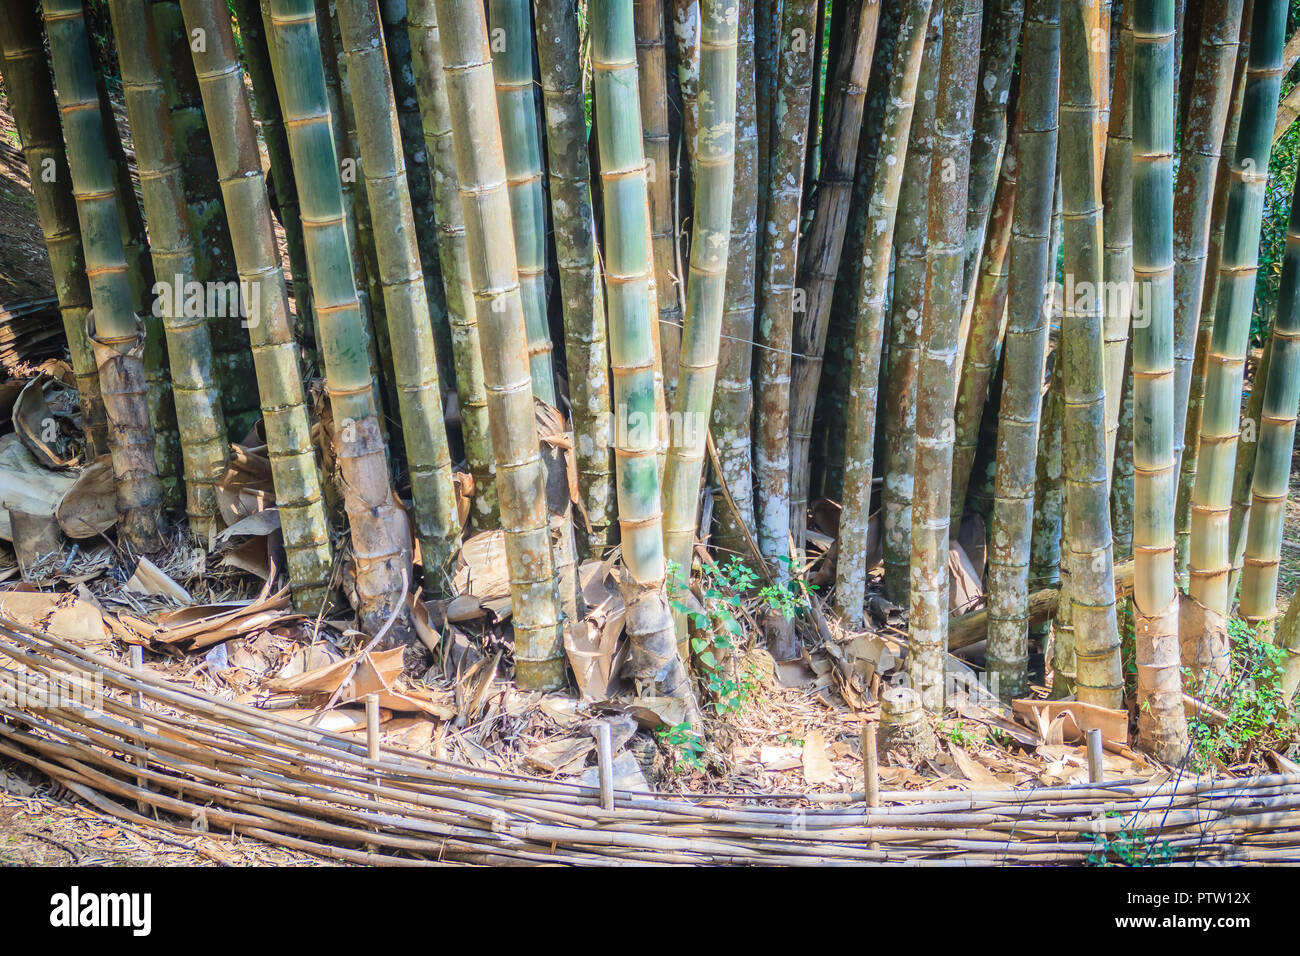 Giant bamboo tree trunks (Dendrocalamus giganteus), also known as dragon bamboo or giant bamboo, is a giant tropical and subtropical, dense-clumping s Stock Photo